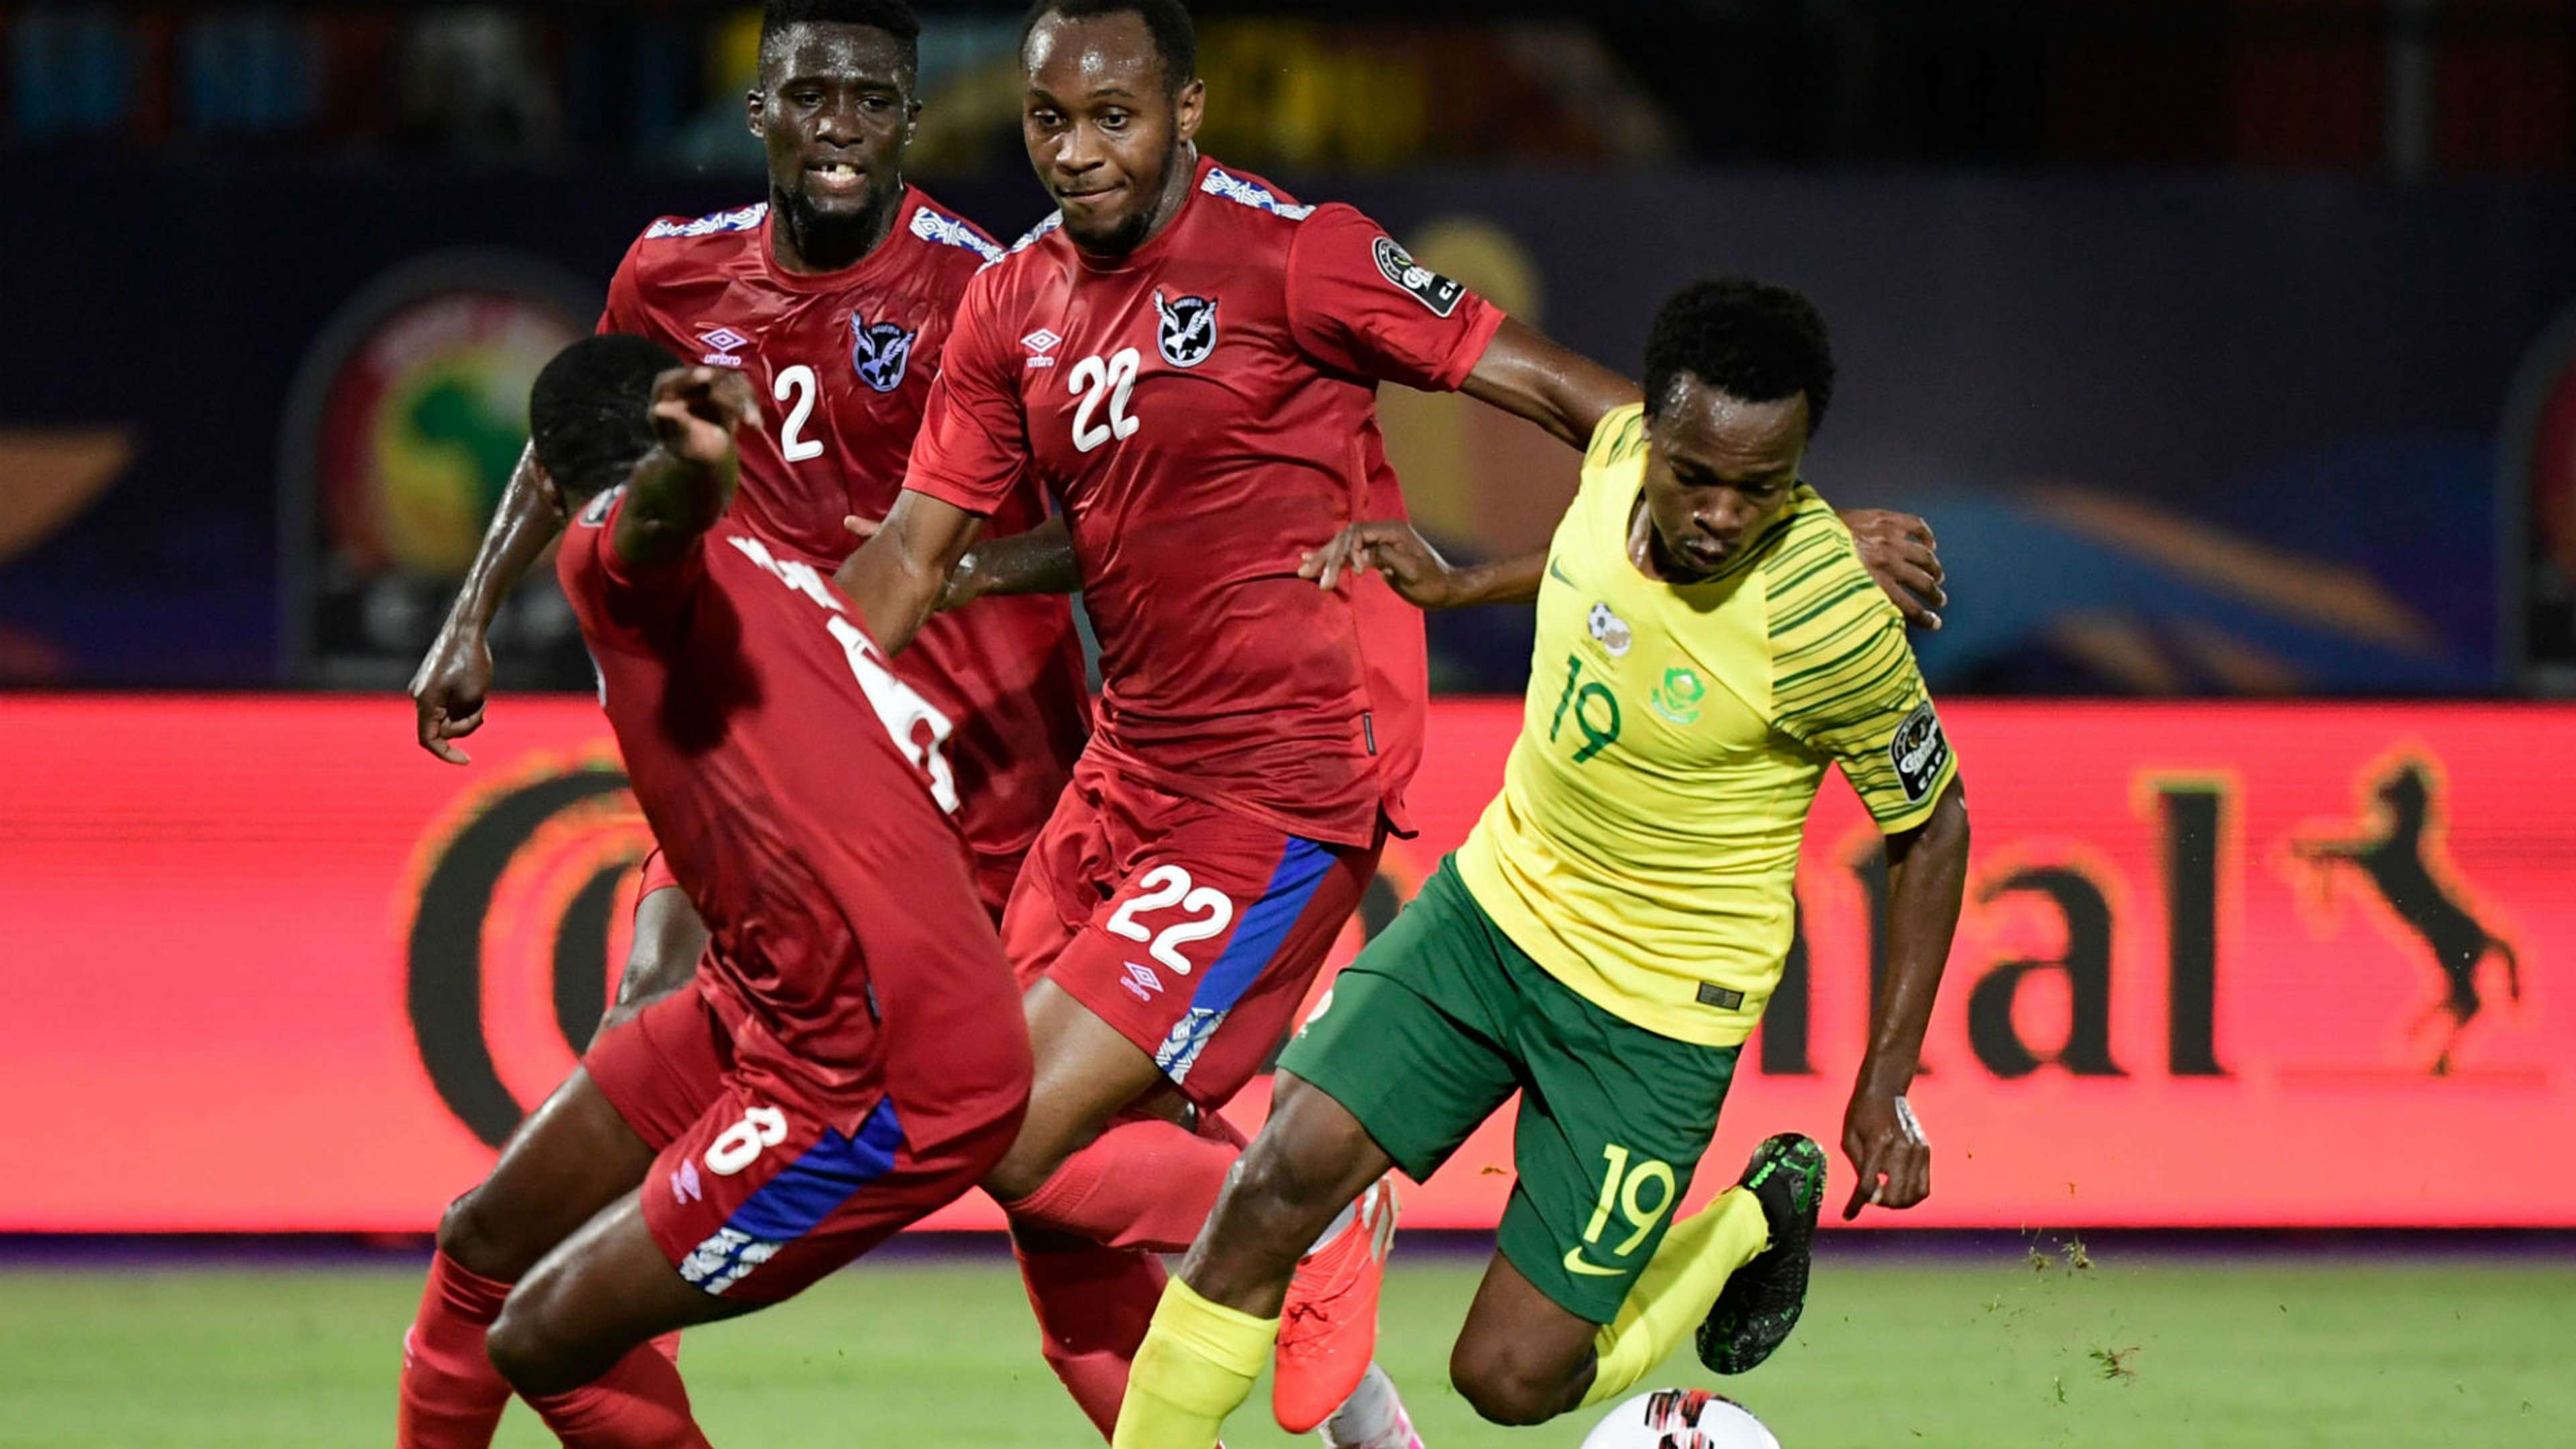 South Africa's Percy Tau v Namibia - June 2019